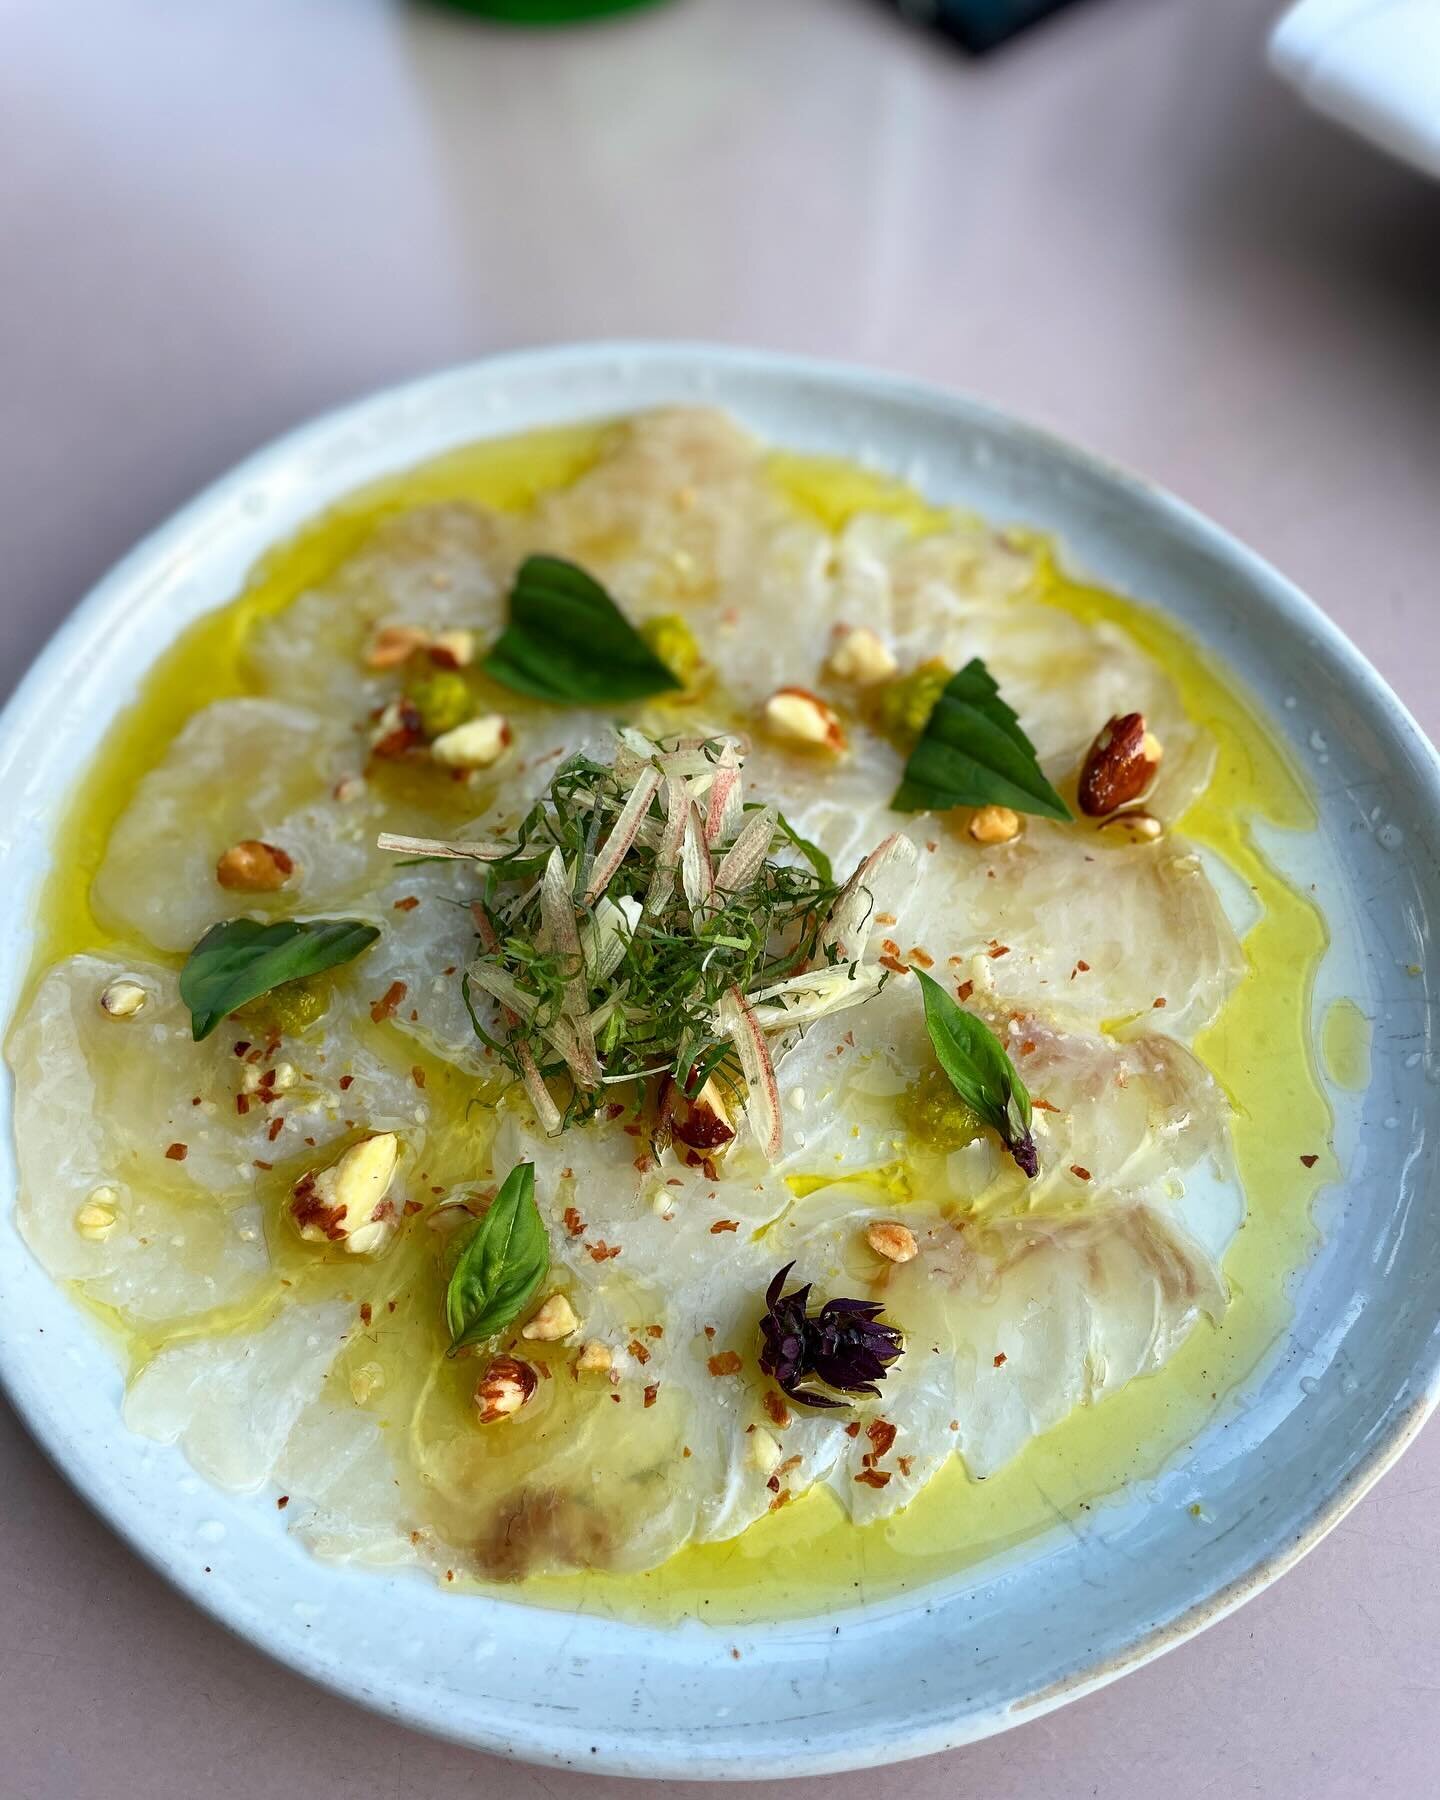 It&rsquo;s not crudo, it&rsquo;s carpaccio. Capisce?

Our beloved hamachi dish got a little spring makeover recently and we just wanted to show off how purrty she is!

Hamachi Carpaccio | Ojai orange kosho, crushed almonds, shiso, myoga, lemon, evoo.